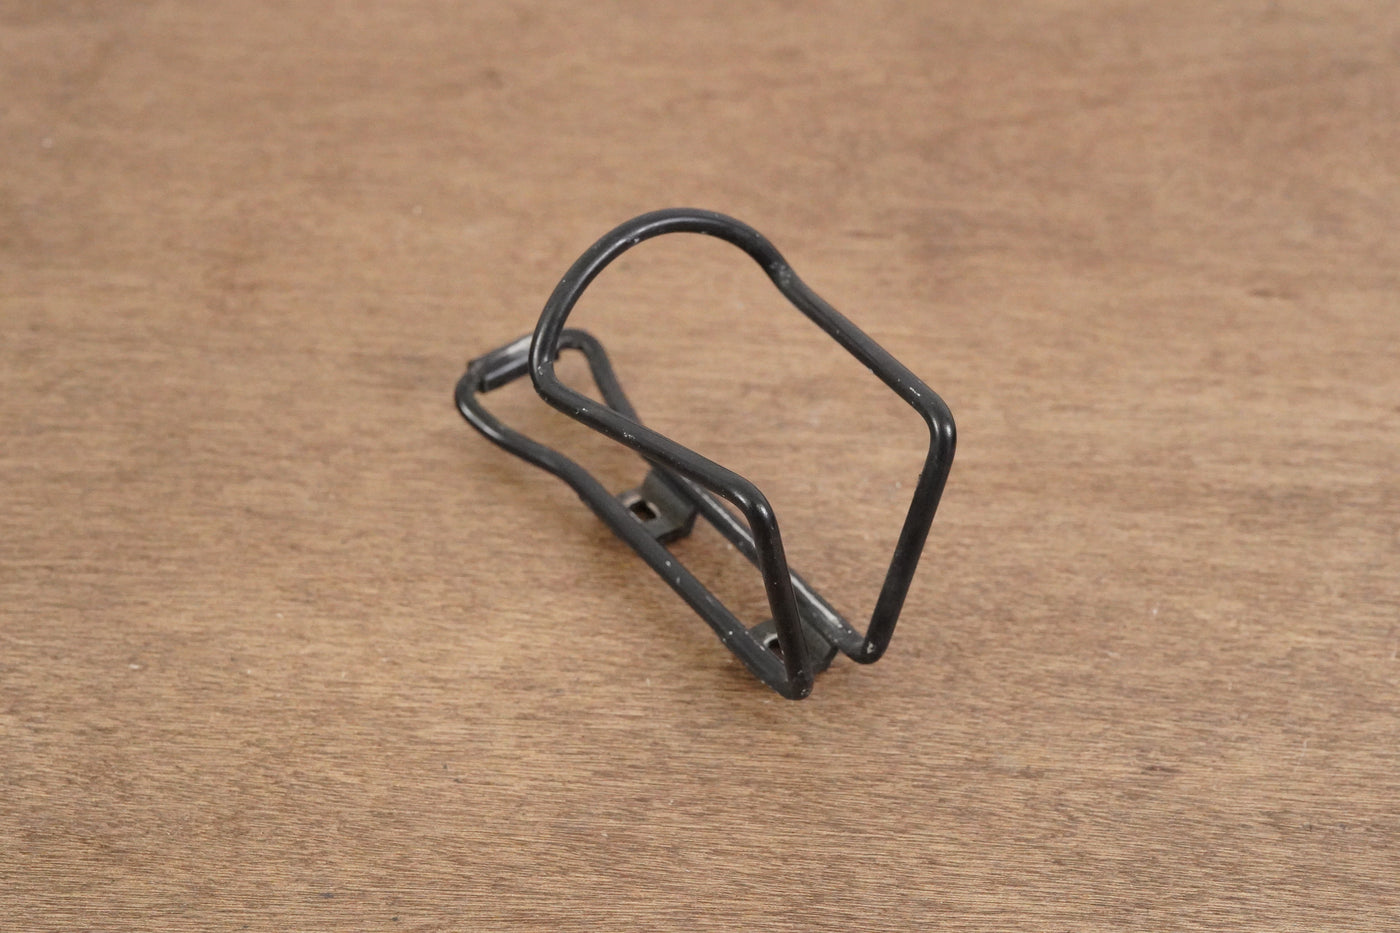 (1) Alloy Water Bottle Cage 70g